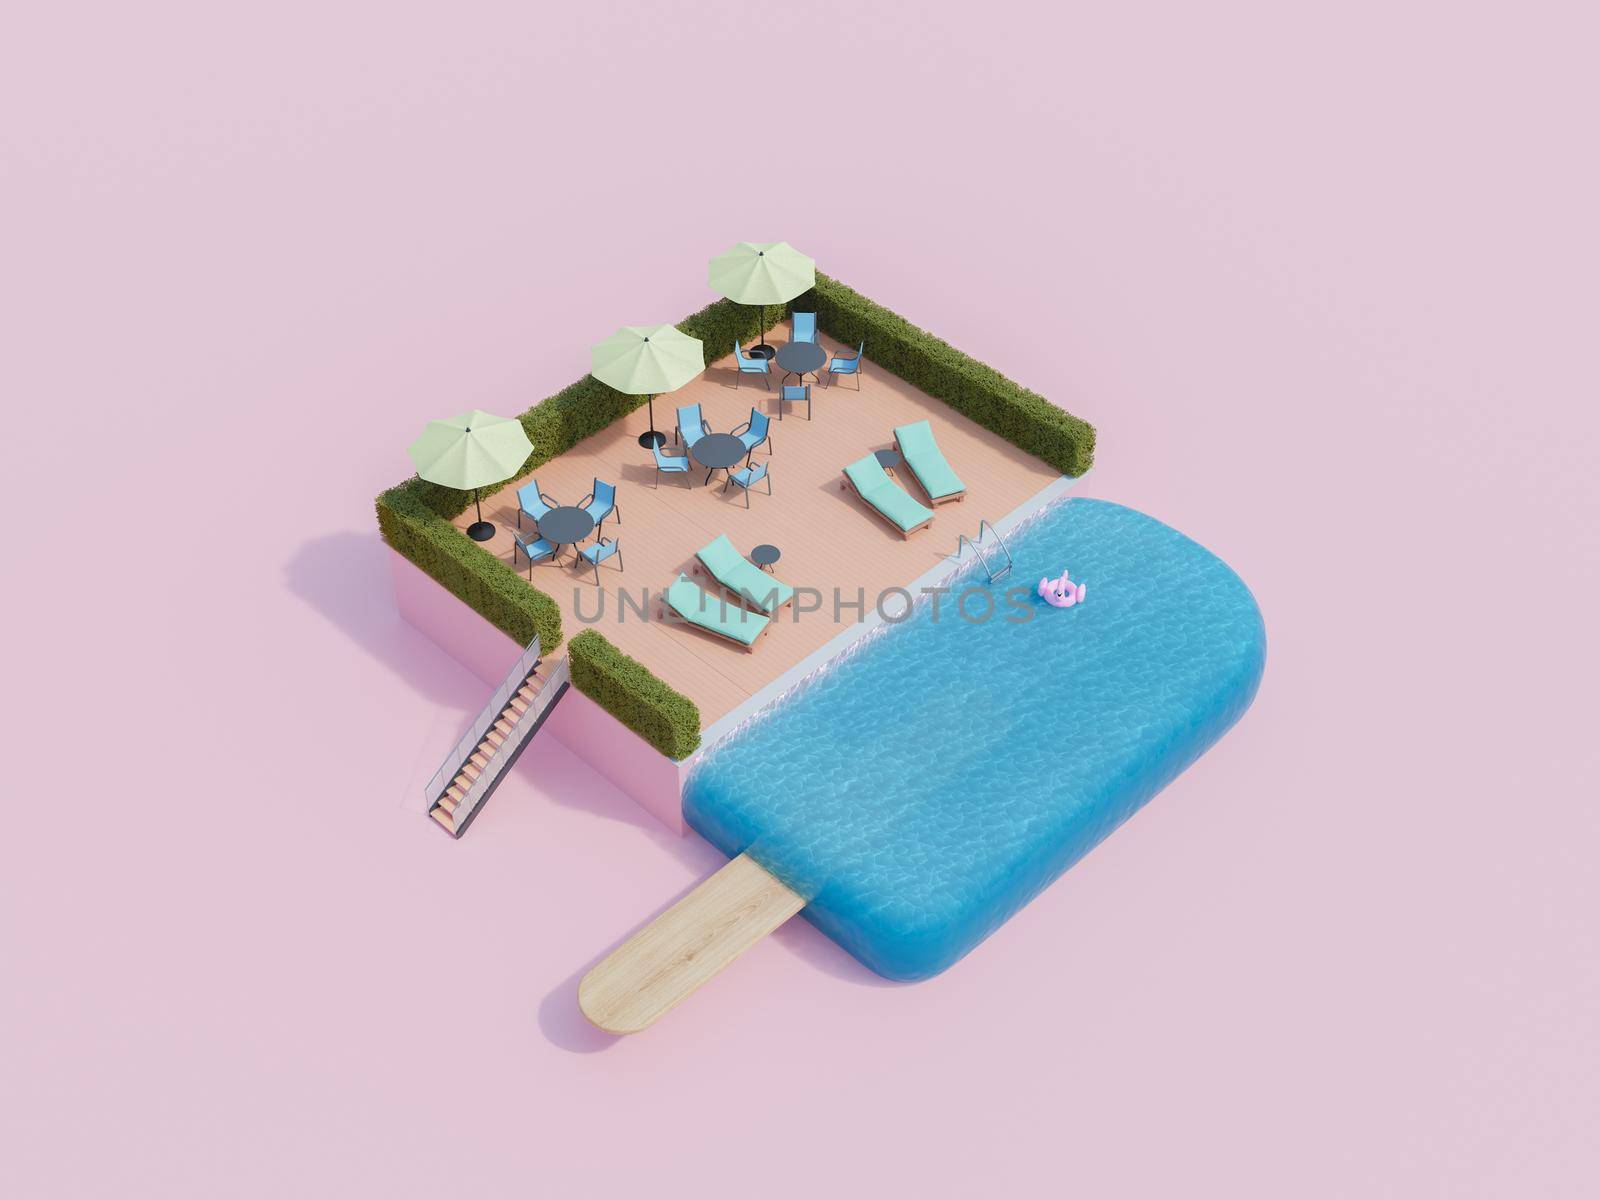 isometric terrace with ice cream shaped pool and tables with umbrellas. 3d rendering